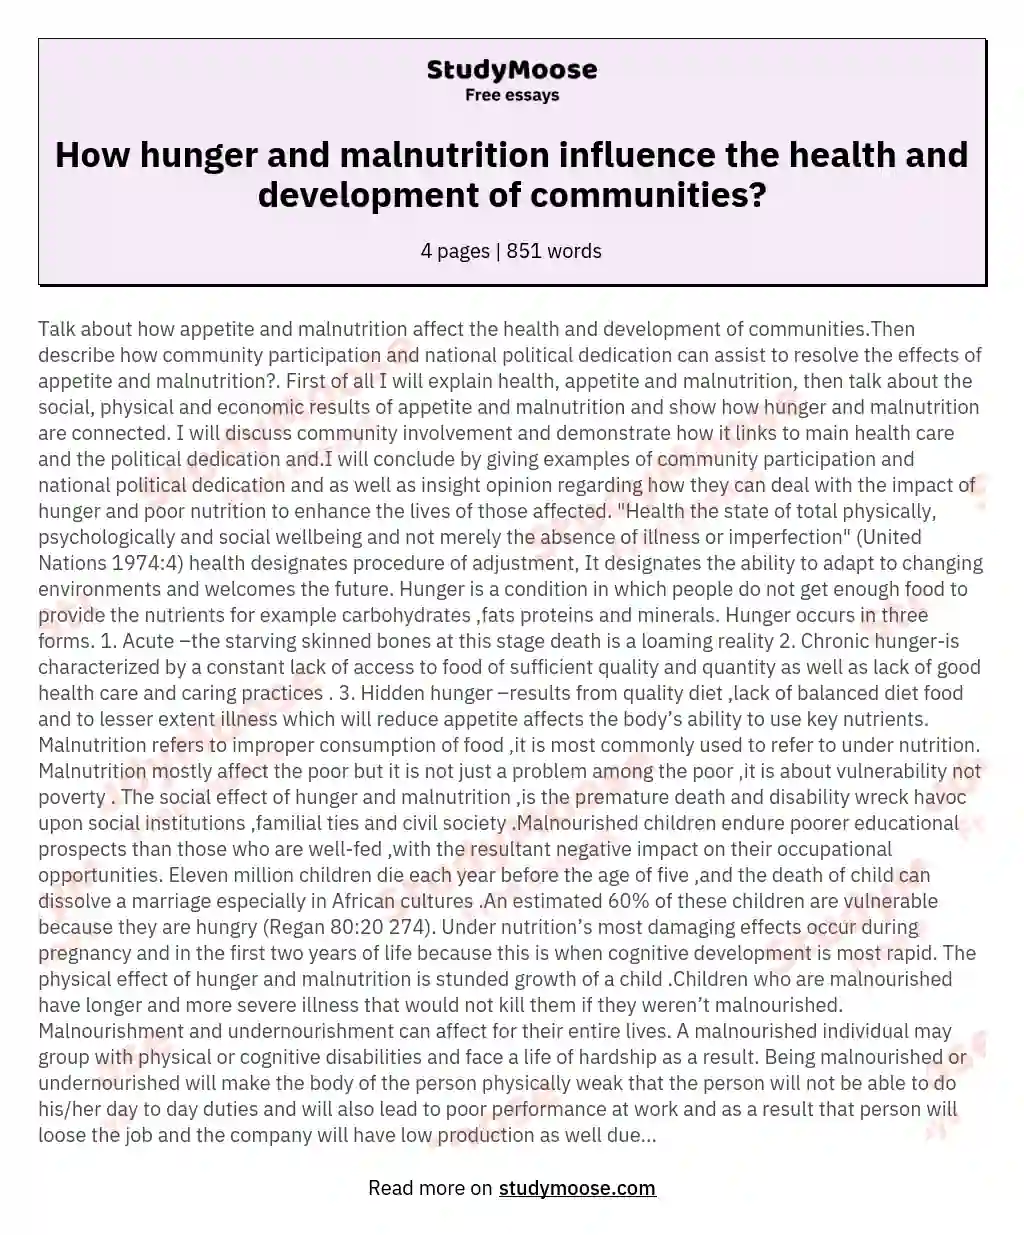 How hunger and malnutrition influence the health and development of communities? essay